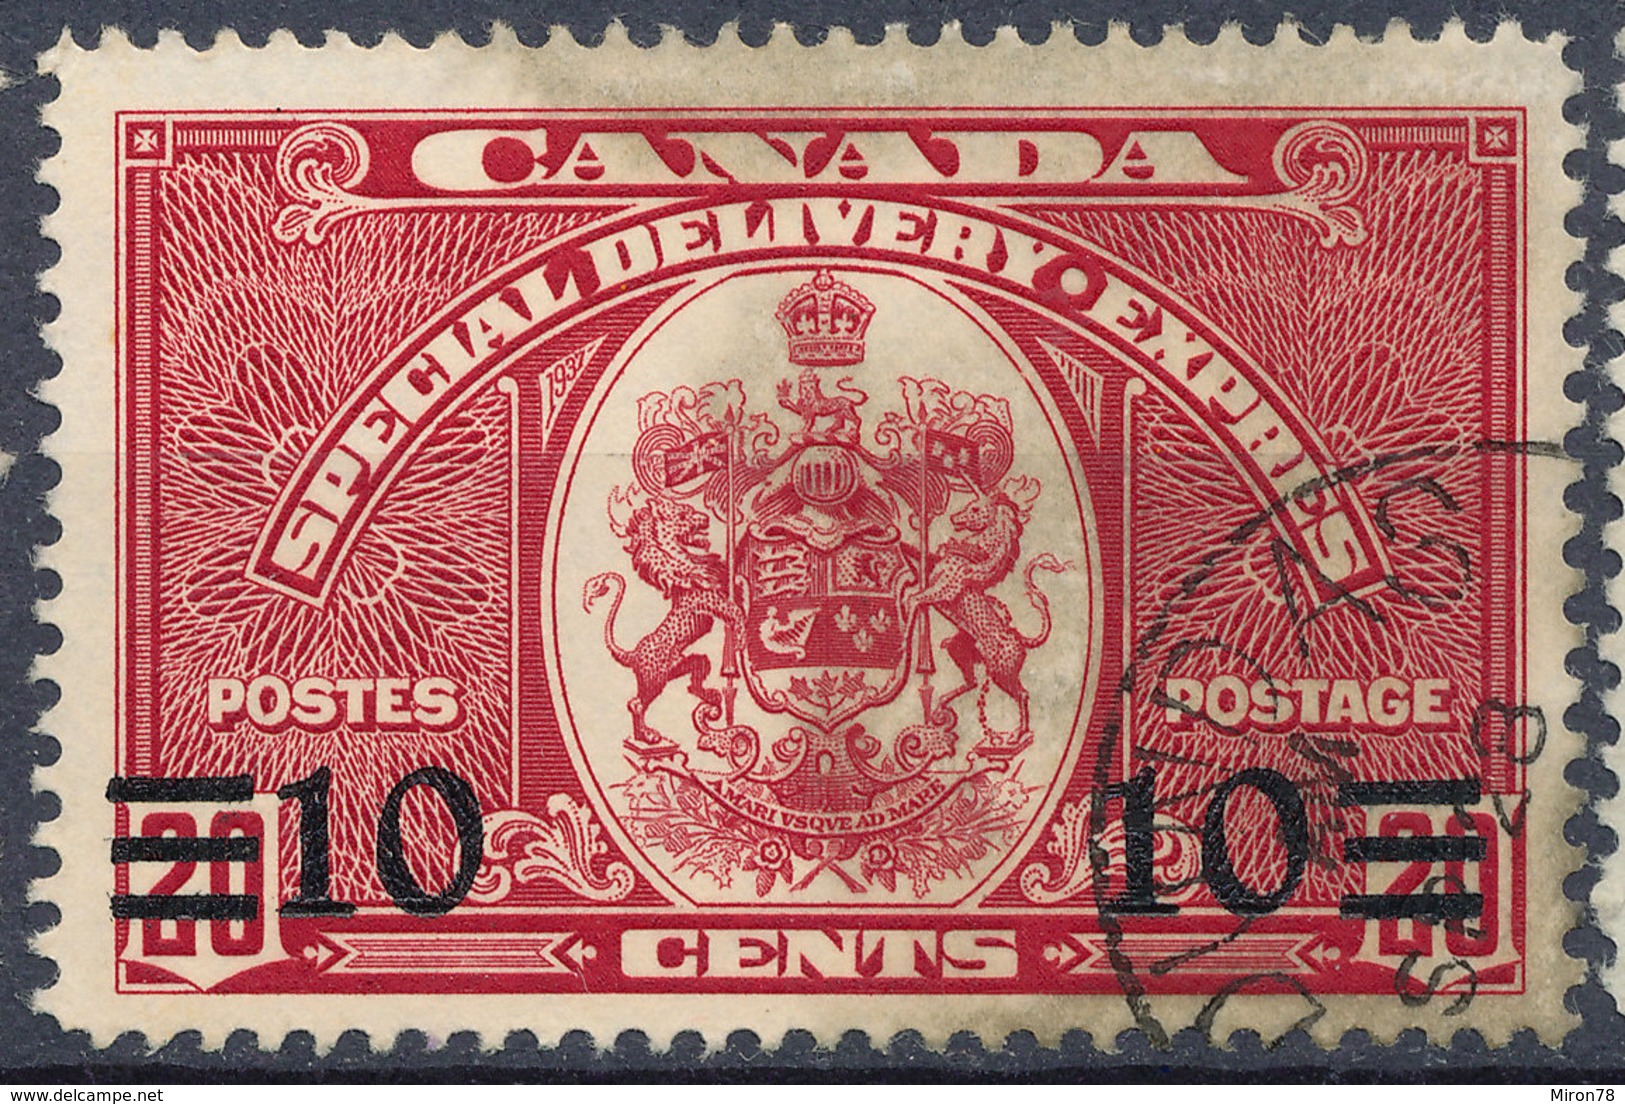 Stamp Canada  1939  Used - Special Delivery